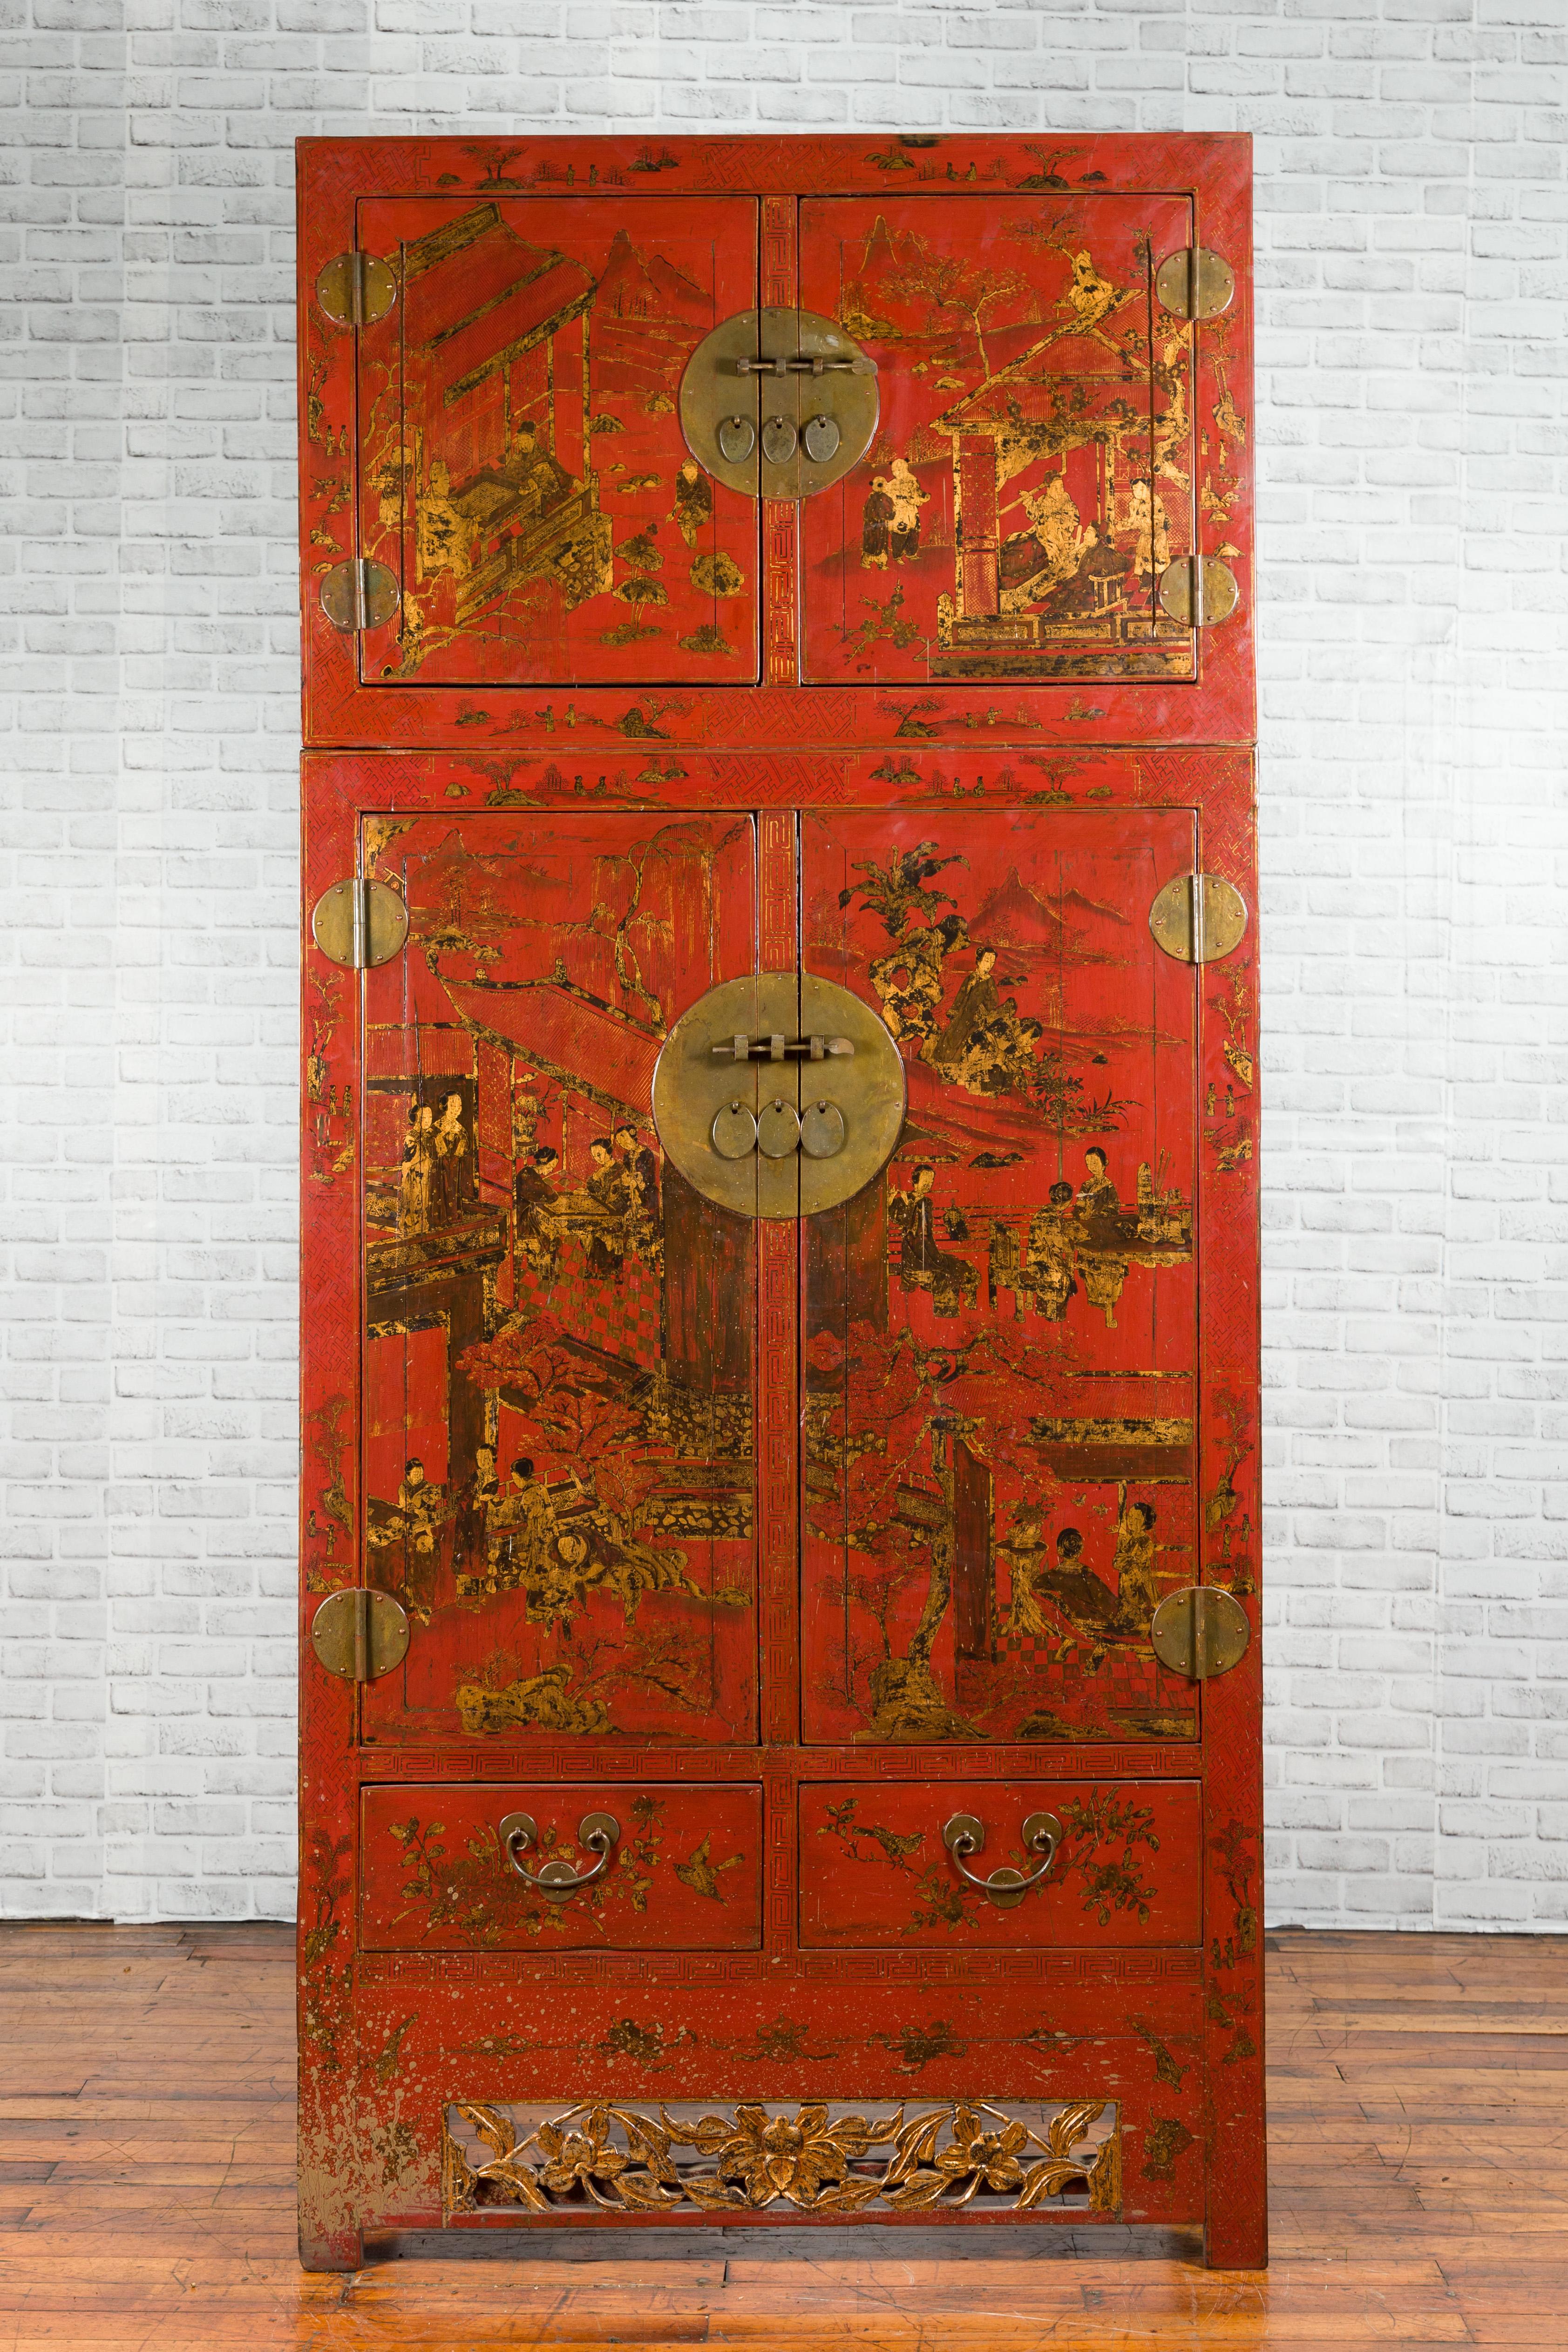 A Chinese Qing dynasty period red lacquer compound cabinet from the 19th century, with gilded Chinoiserie décor, drawers and carved apron. Created in China during the Qing dynasty, this compound cabinet features a smaller storage chest stacked on